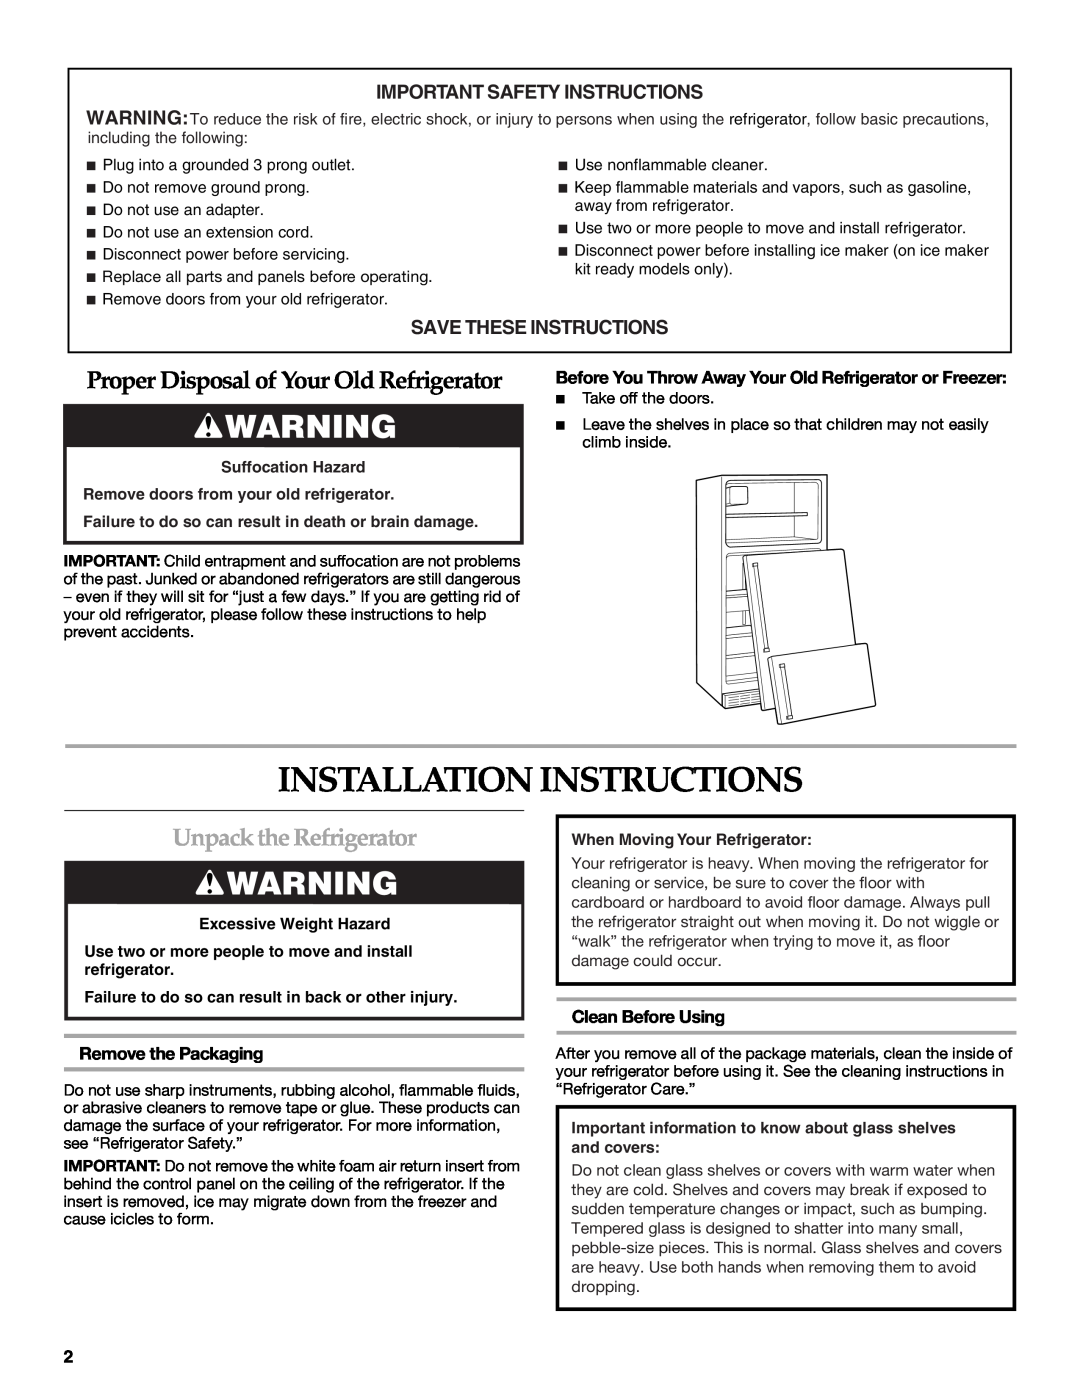 Maytag W10249206A, W10249207A Installation Instructions, Proper Disposal of Your Old Refrigerator, Unpack the Refrigerator 